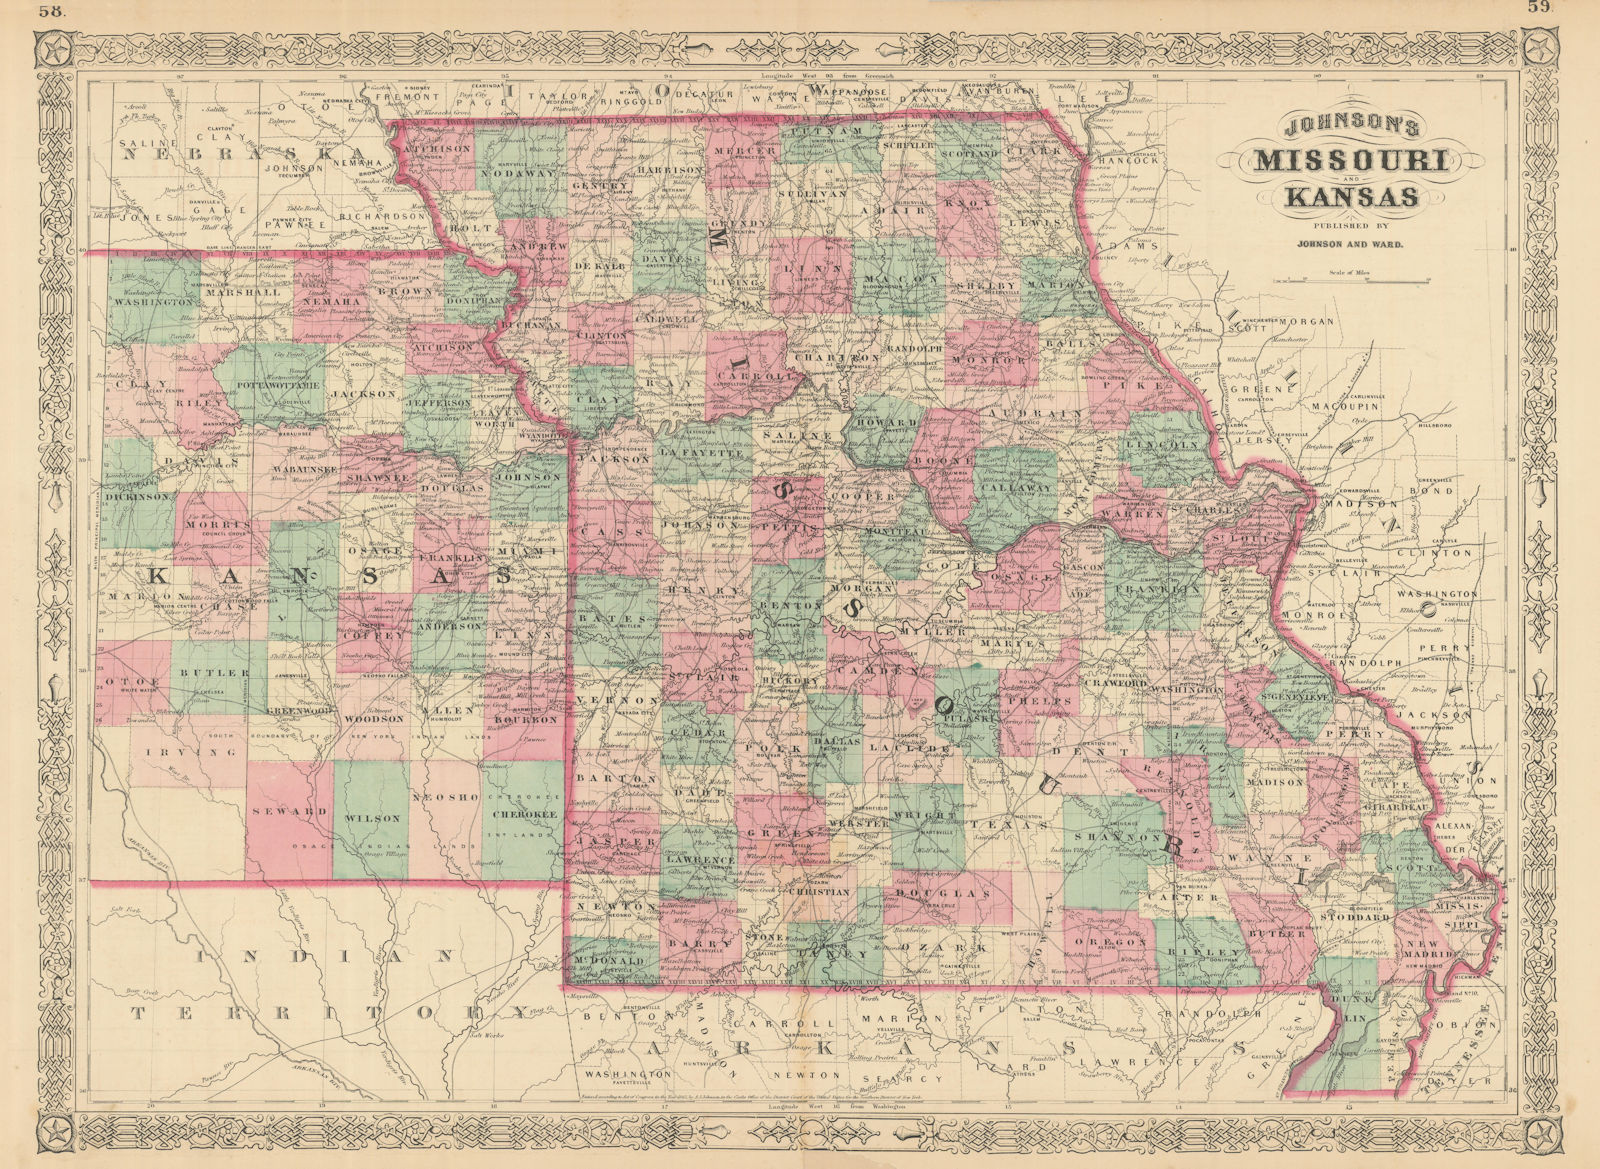 Associate Product Johnson's Missouri & Kansas. US state map showing counties 1866 old